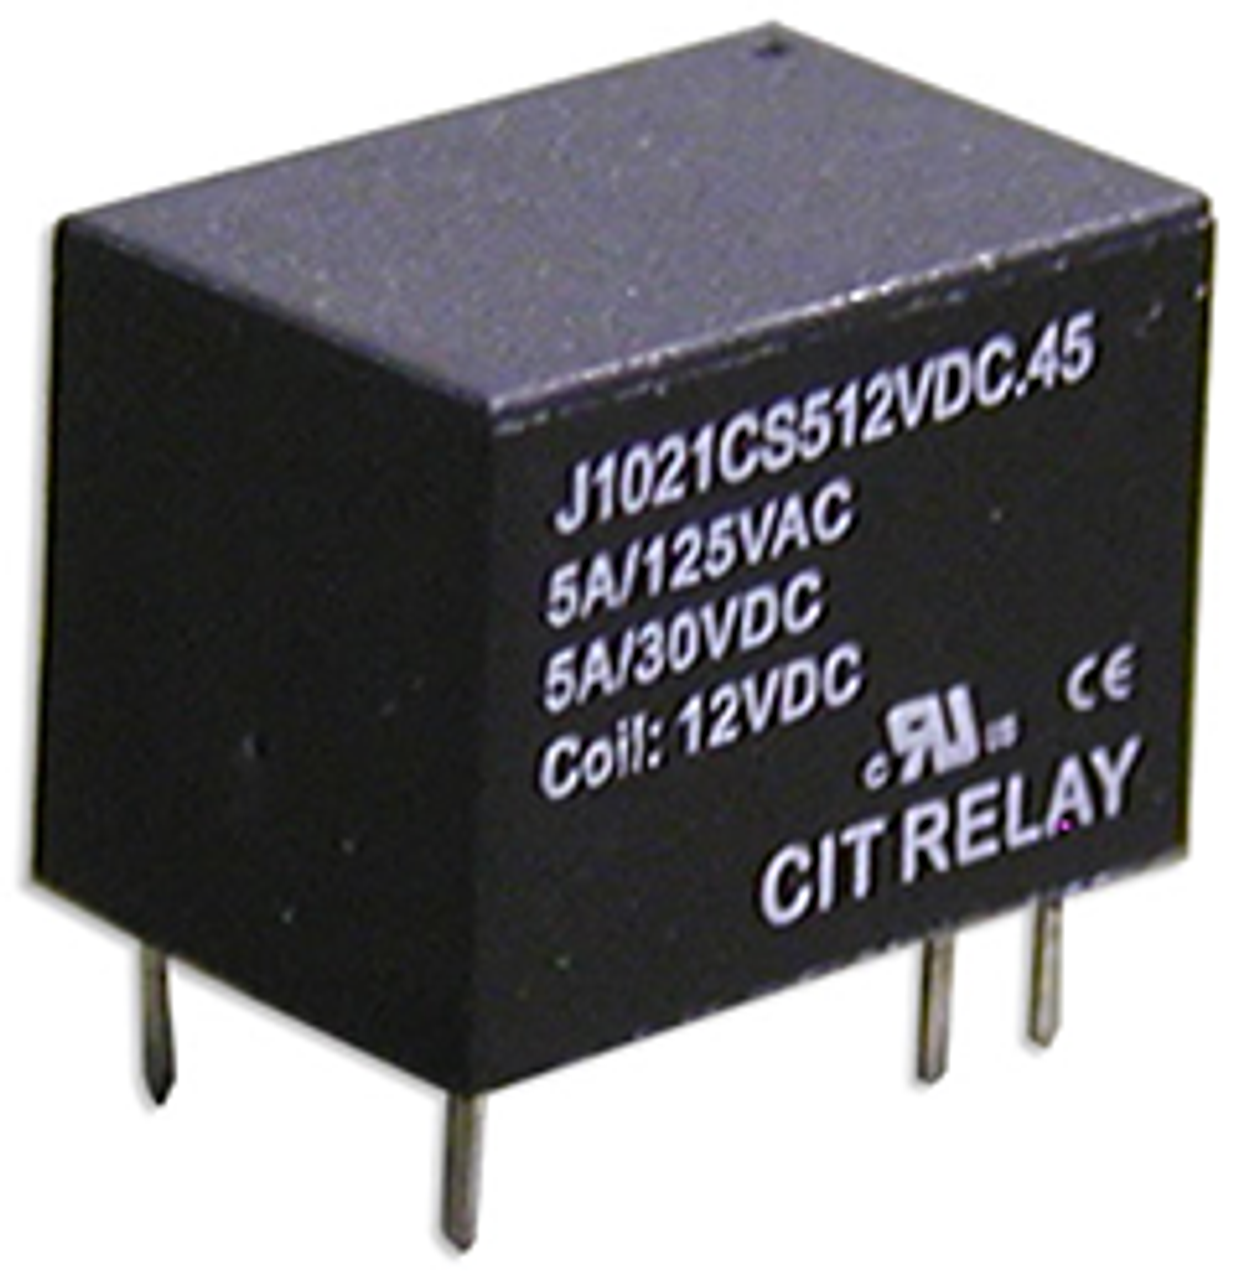 CIT Relay and Switch J1021AS124VDC.45 Signal Relays